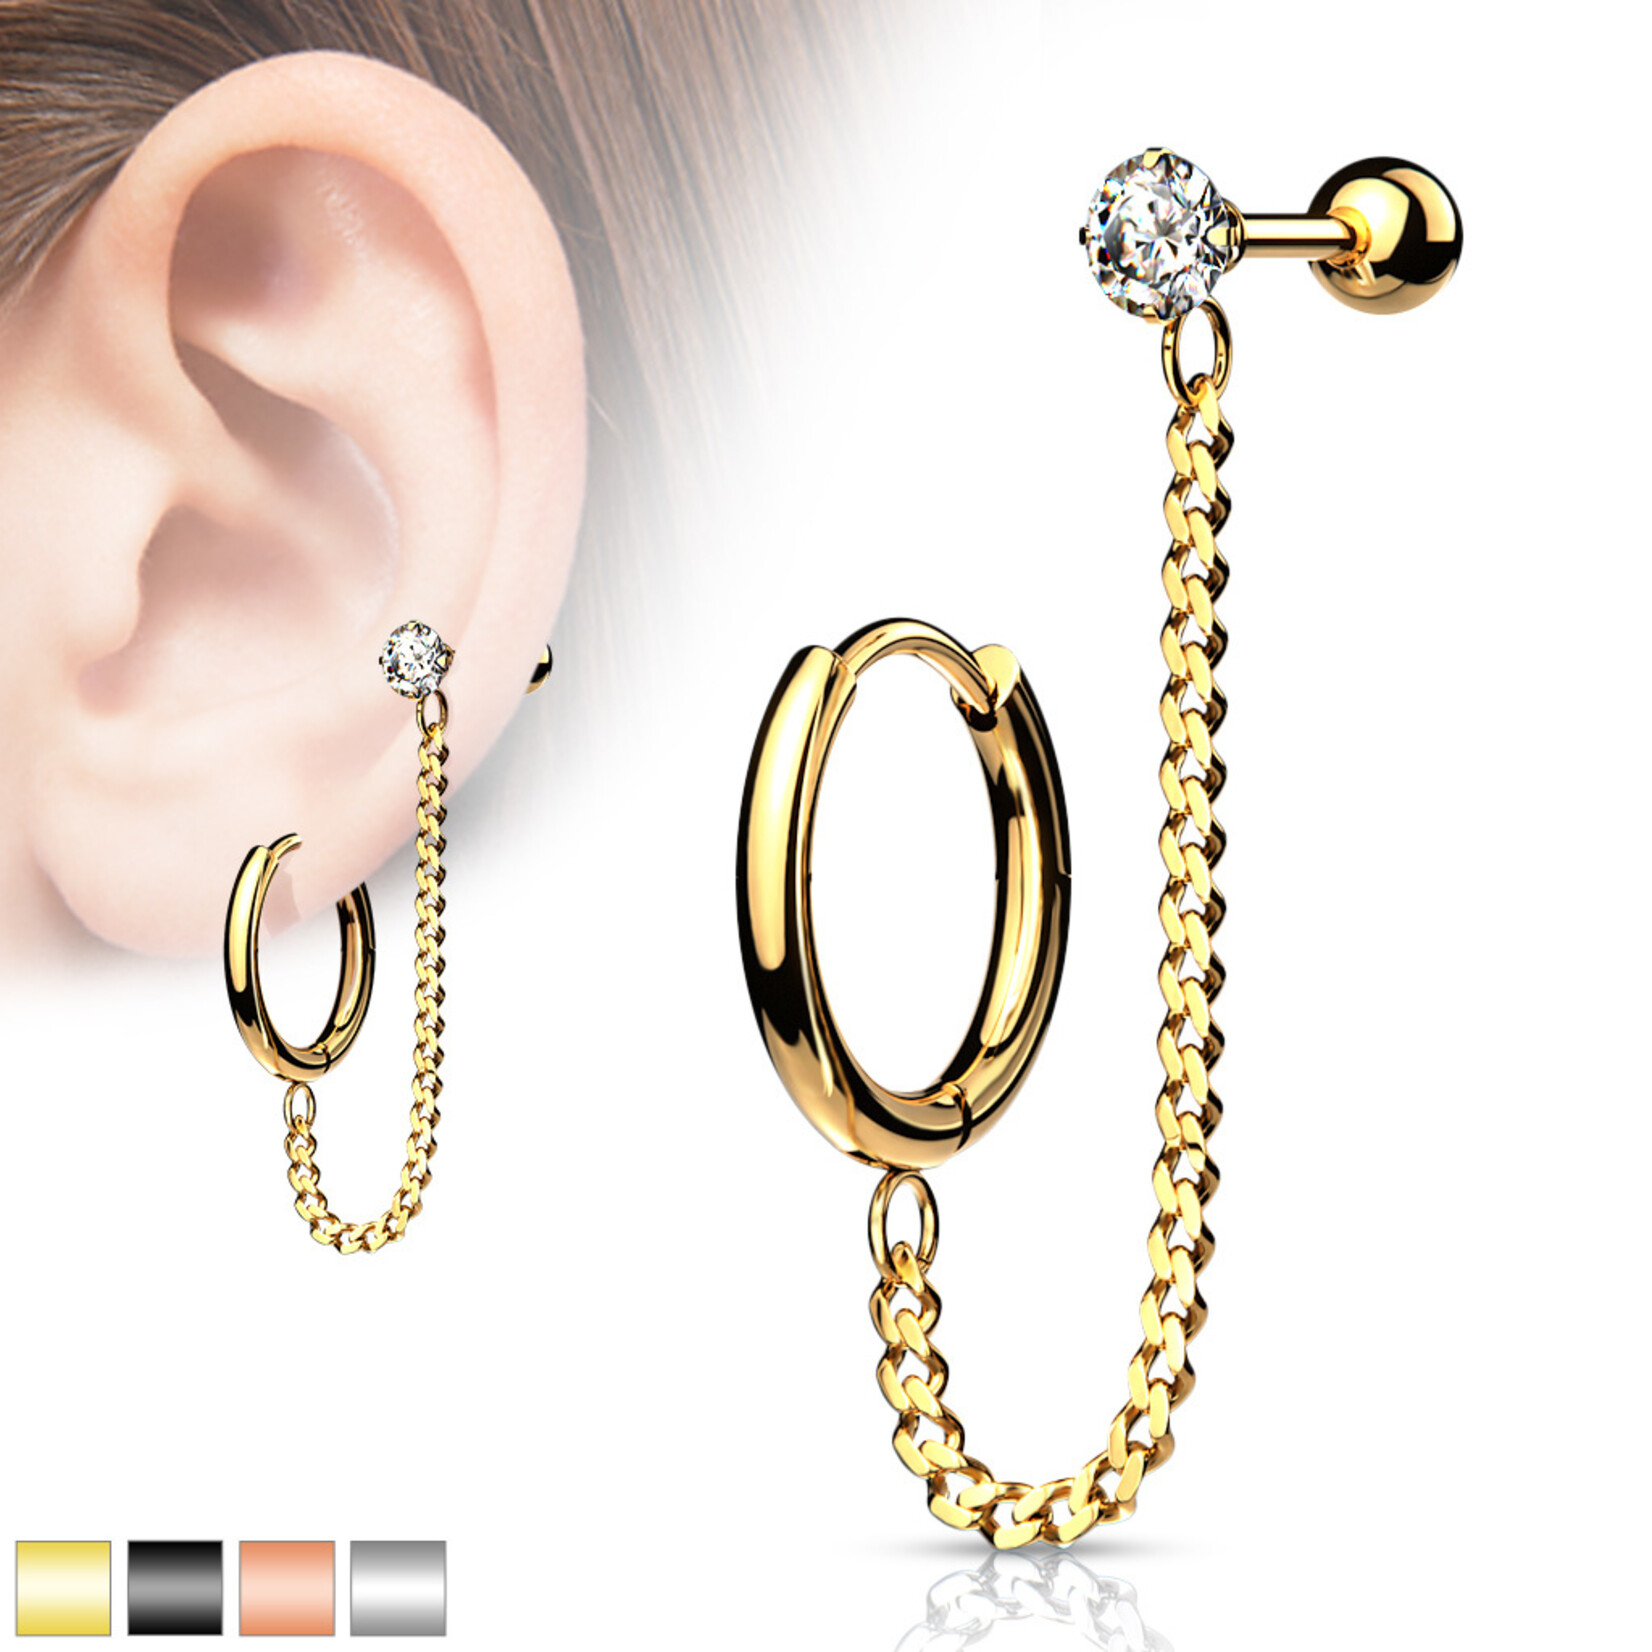 Hollywood Body Jewelry Round Clicker Hoop Earring and Chain Linked Cartilage Barbell